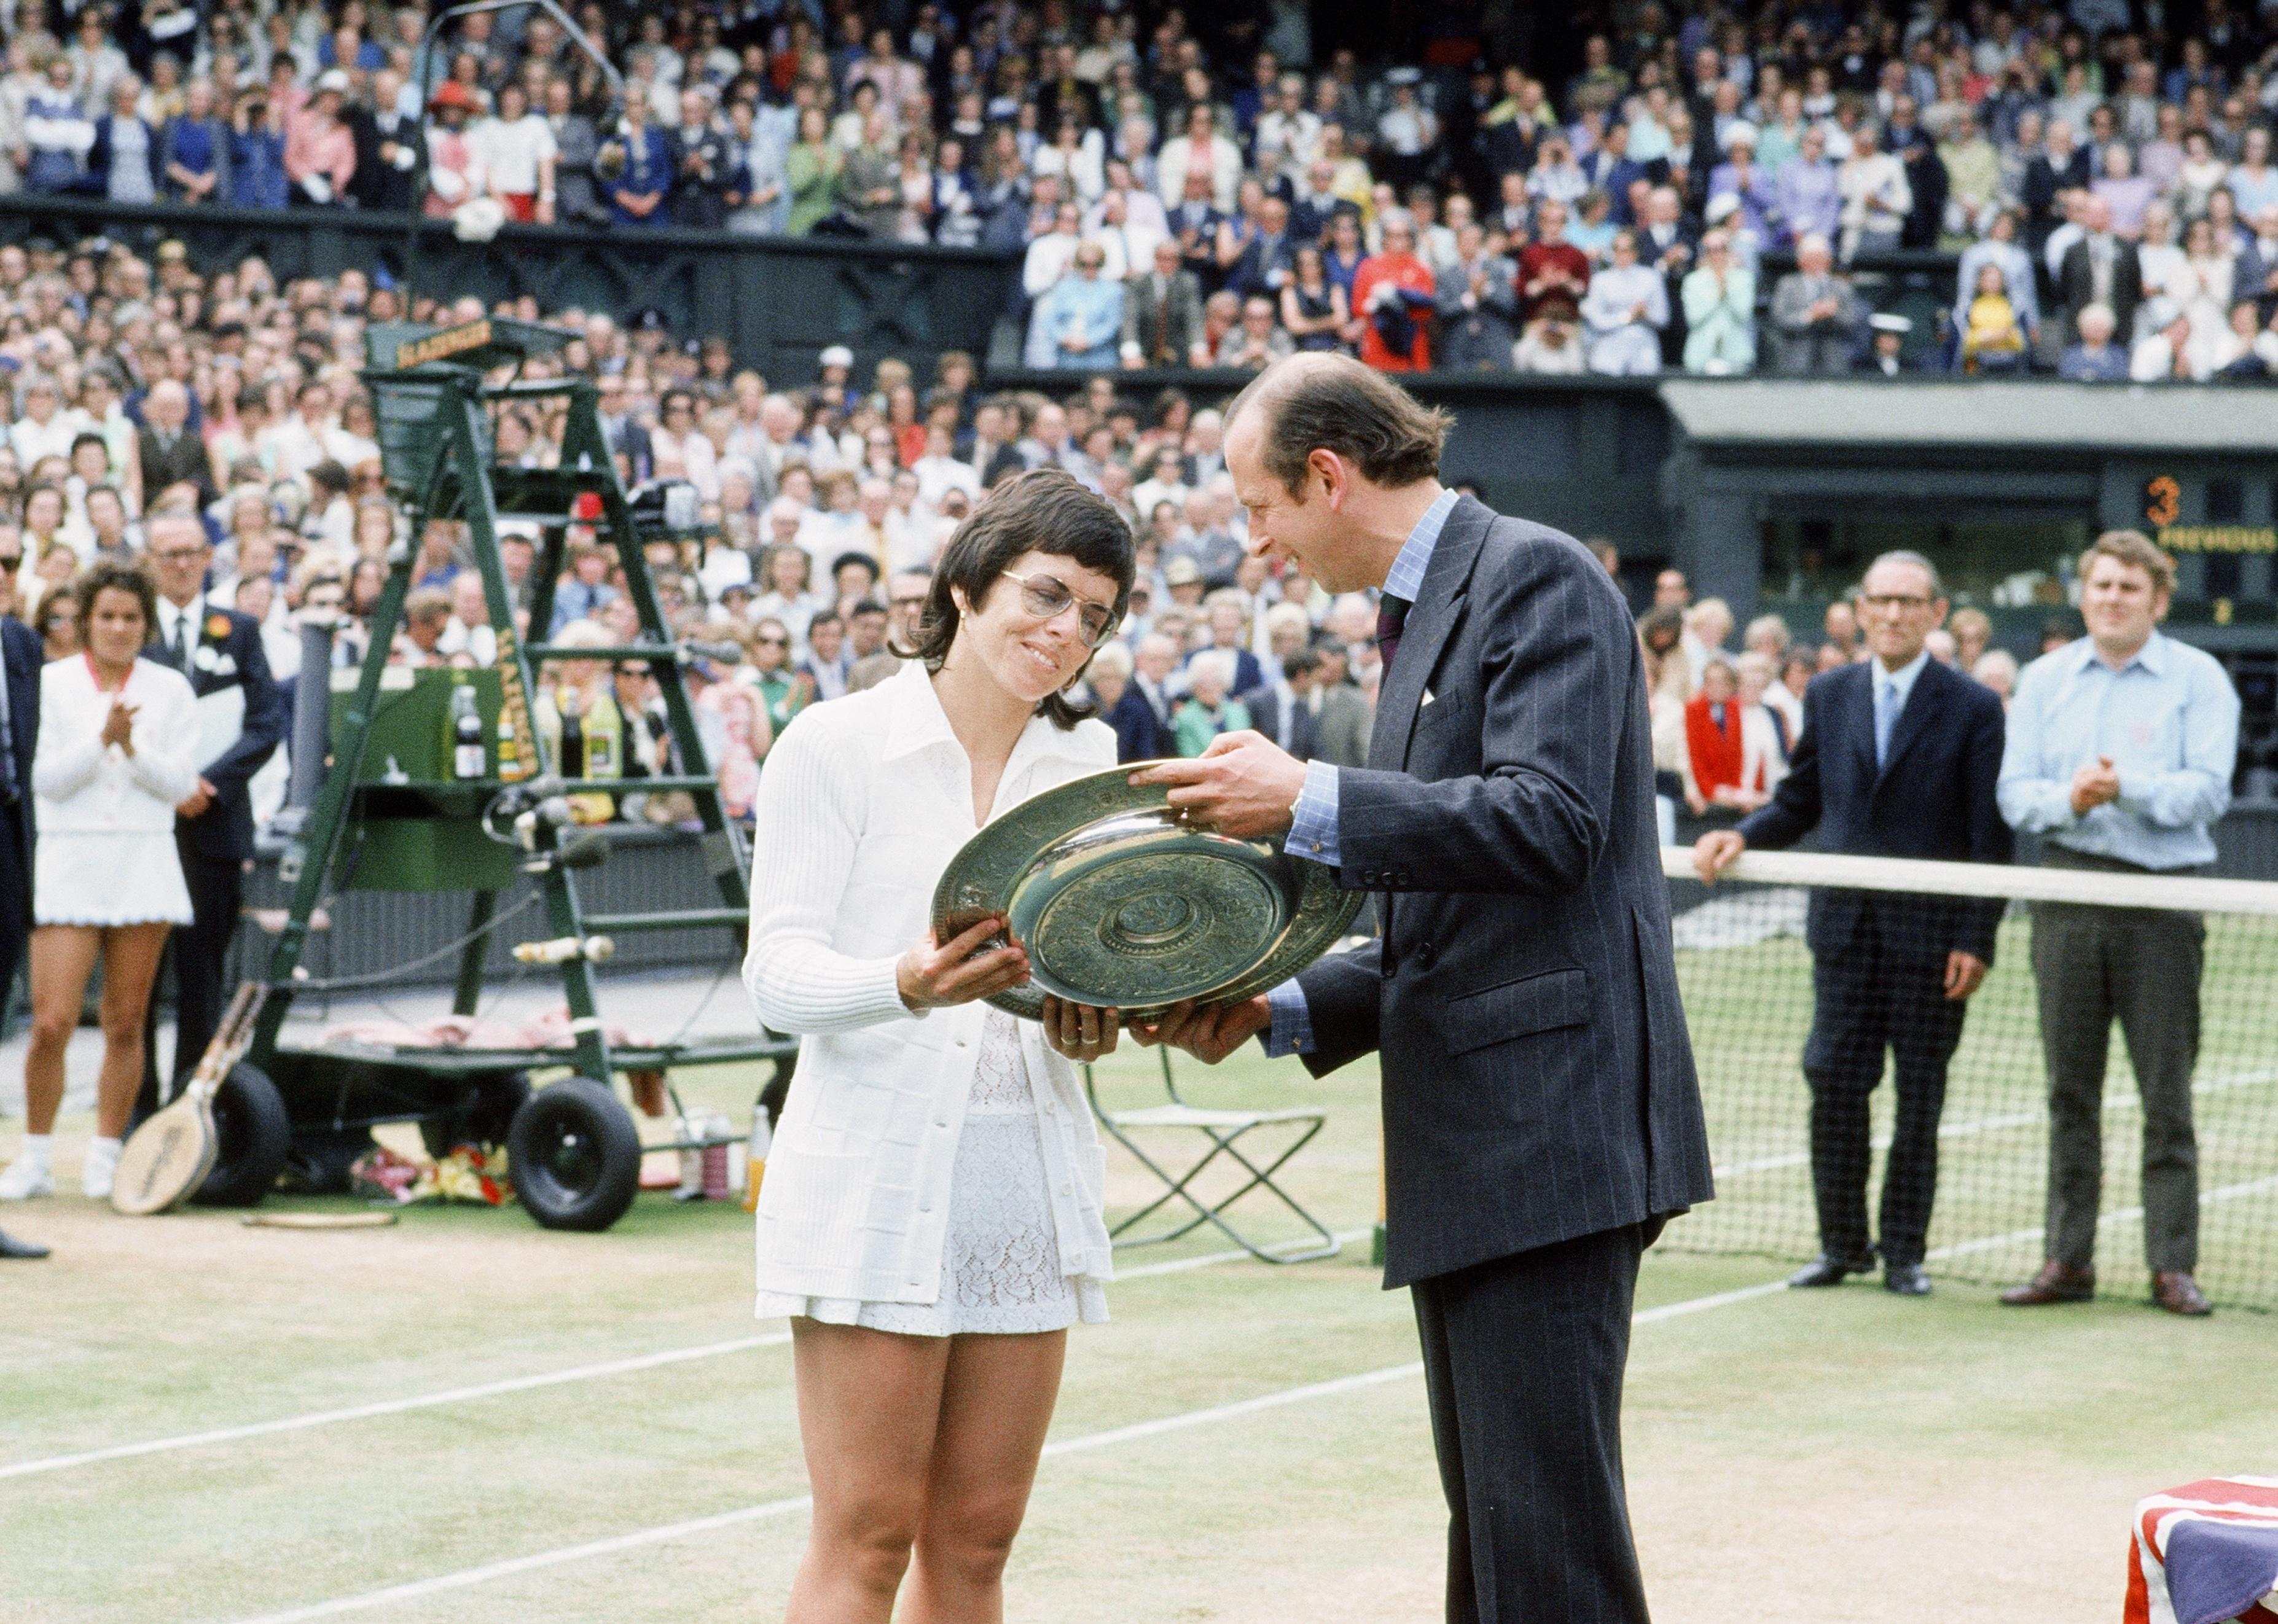 The Duke of Kent presents The Venus Rosewater Dish to Billie Jean King after her 1972 Wimbledon victory.